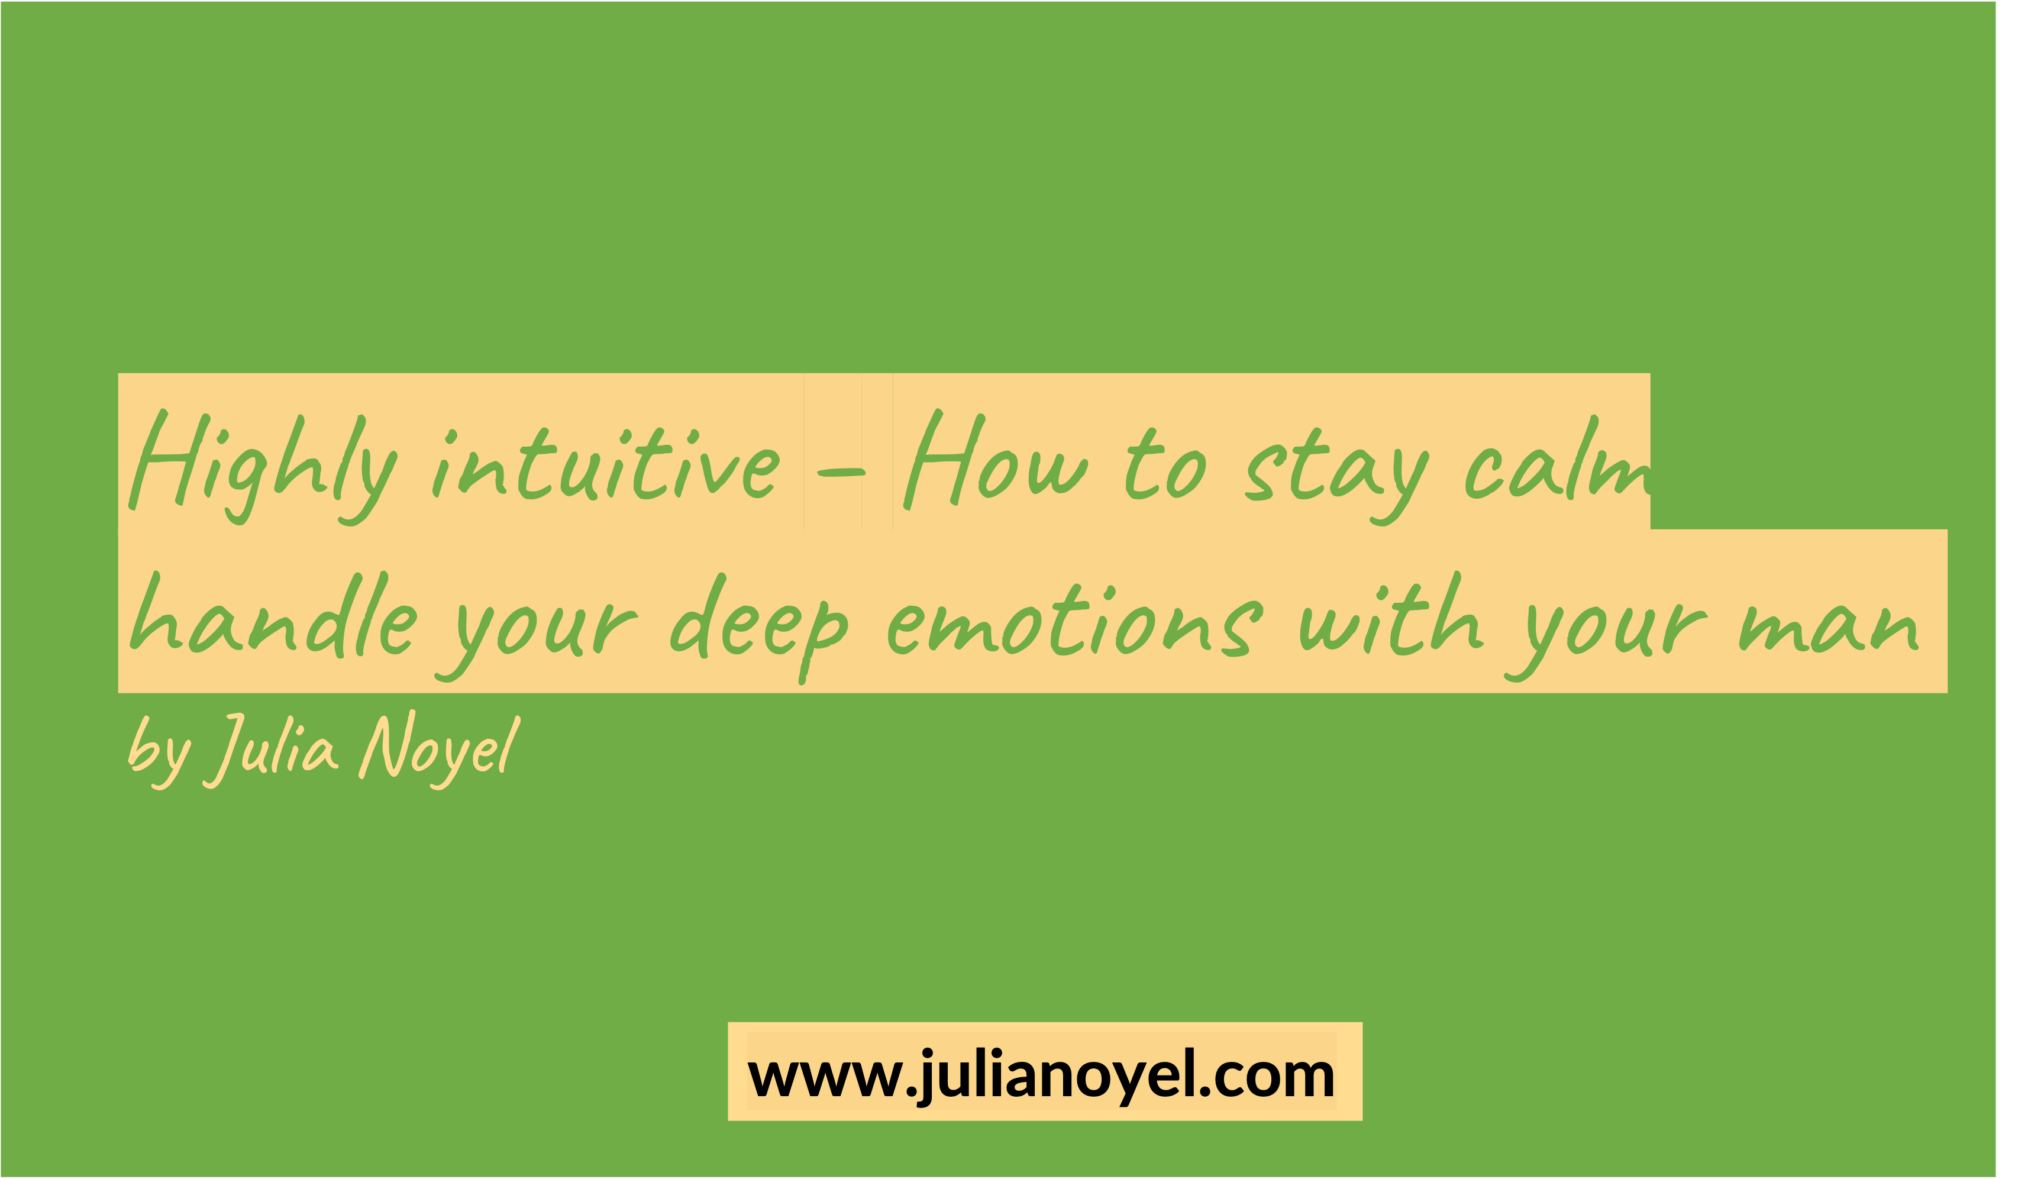 Highly intuitive – How to stay calm handle your deep emotions with your man by Julia Noyel